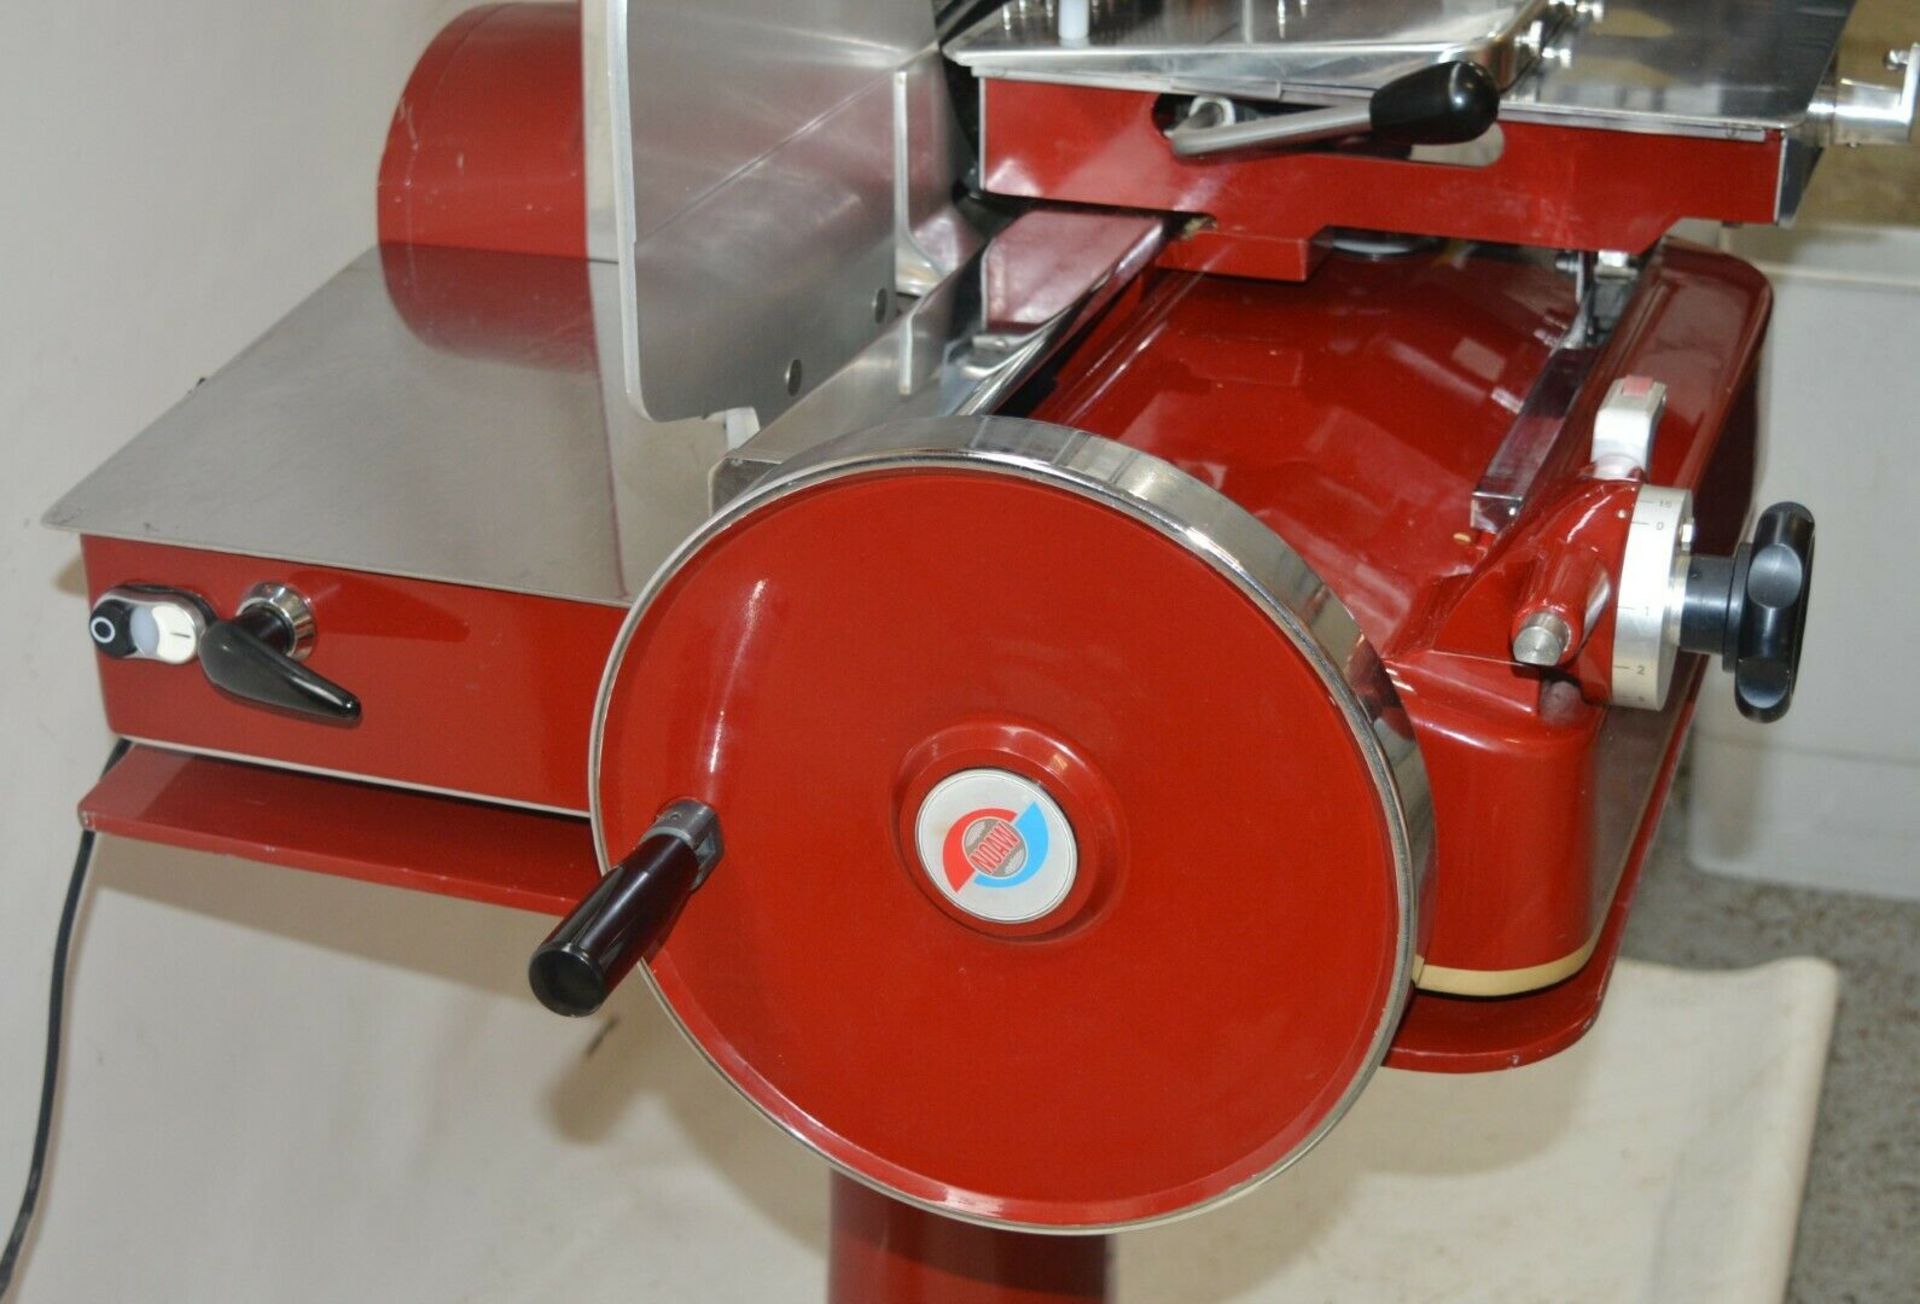 1 x Noaw 370mm Flywheel Meat / Prosciutto Slicer - Model 370/81CE220 - Ex M&S Made in Italy - - Image 3 of 9